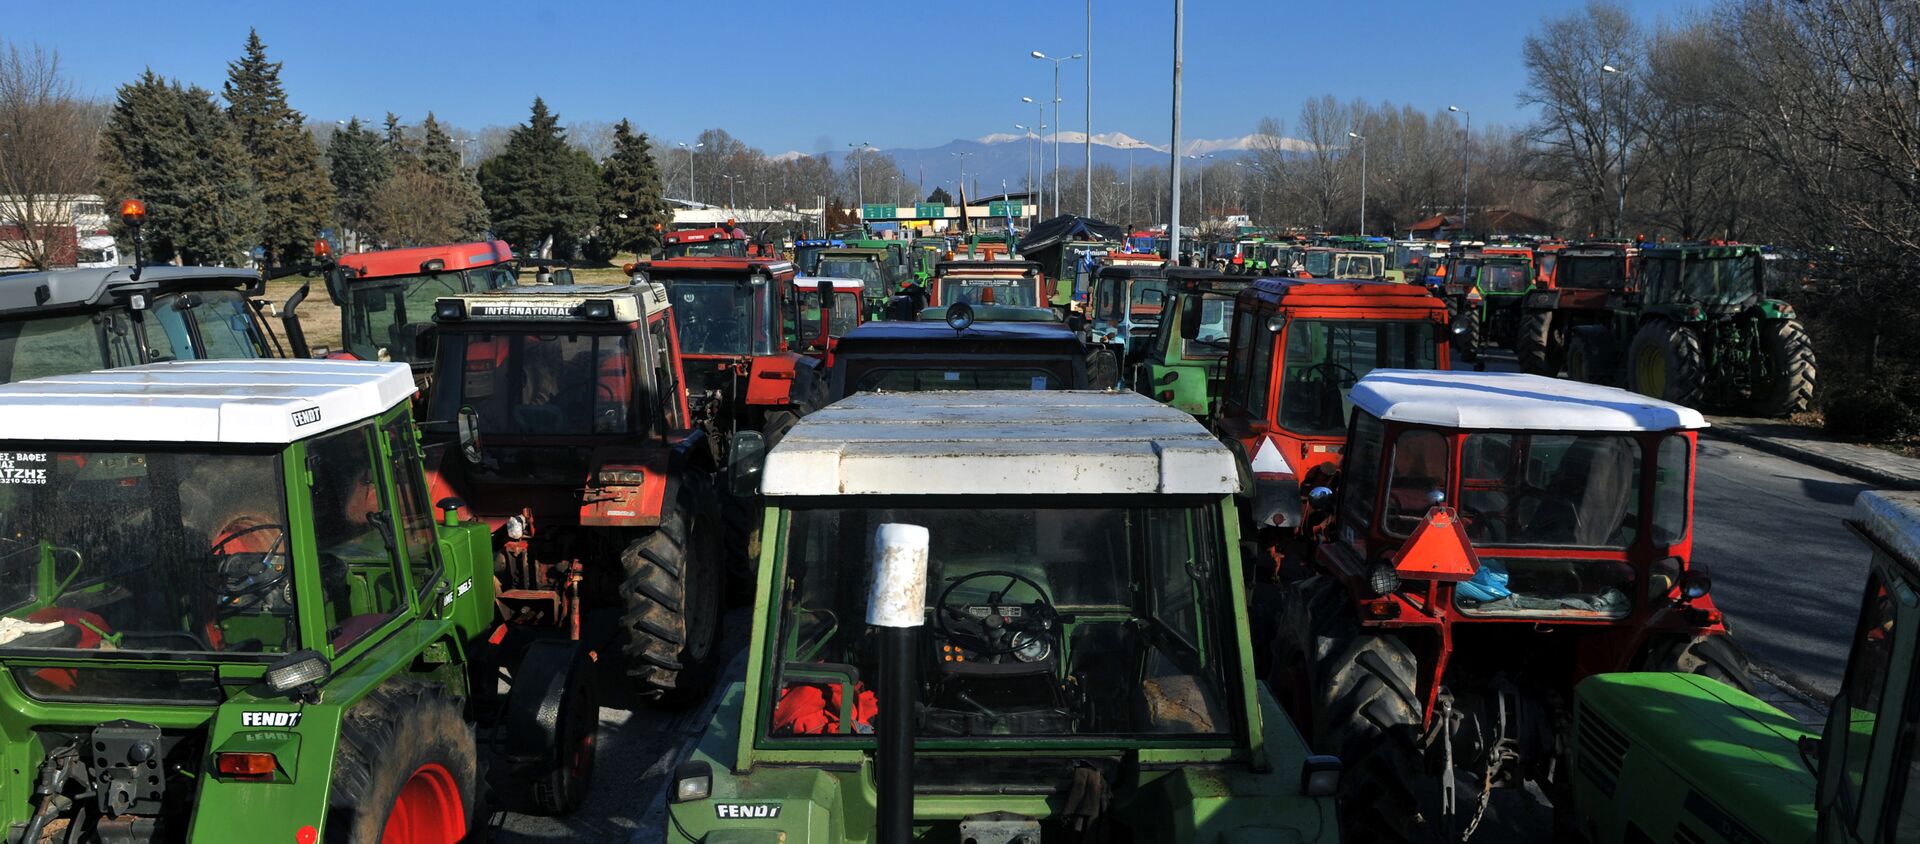 Greek farmers staged on Monday demonstrations across the country by blocking roads with their tractors, protesting against tax increases, Greek Reporter news portal reported - Sputnik International, 1920, 23.01.2017